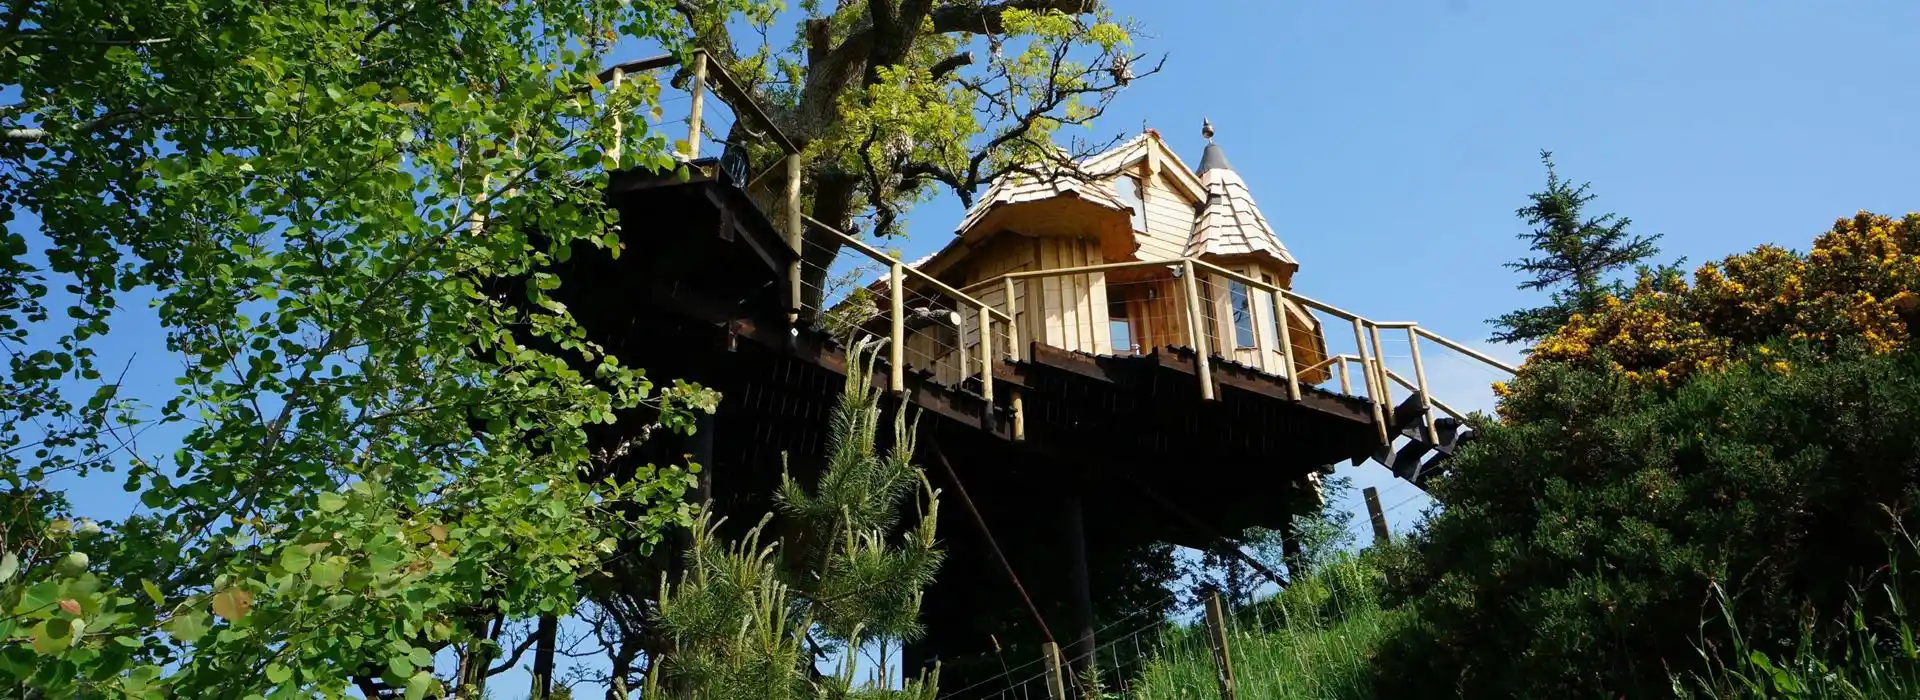 Treehouse holidays in Norfolk